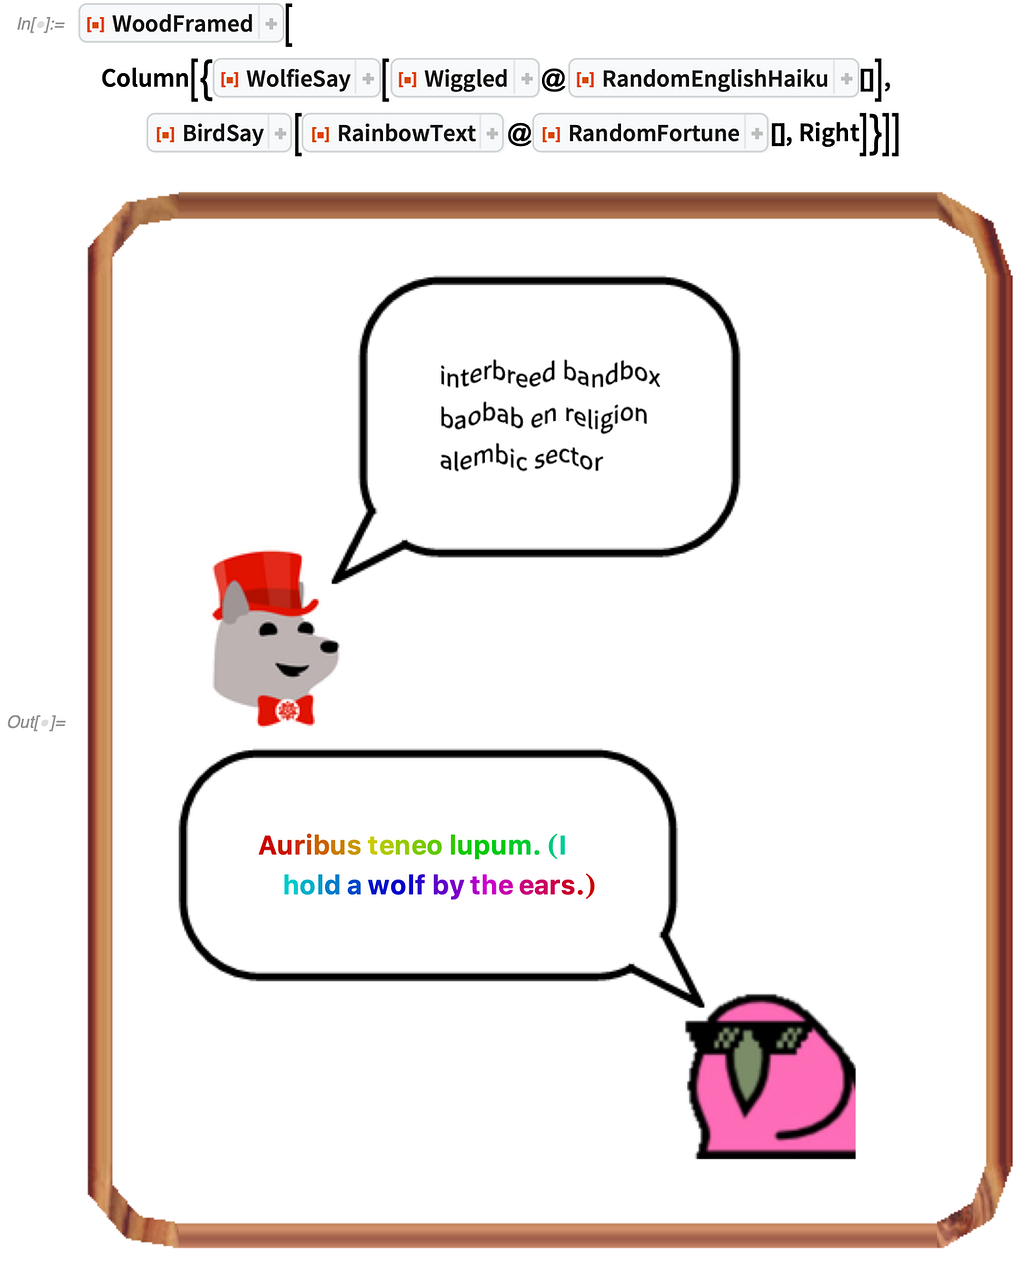 Wolf cartoon (Wolfie) in red top hat with a speech bubble filled with wavy, nonsense text. Below is a bird with a speech bubble fixed with Latin reading “I hold a wolf by the ears,” written in rainbow text. Everything is encased in a wooden frame.